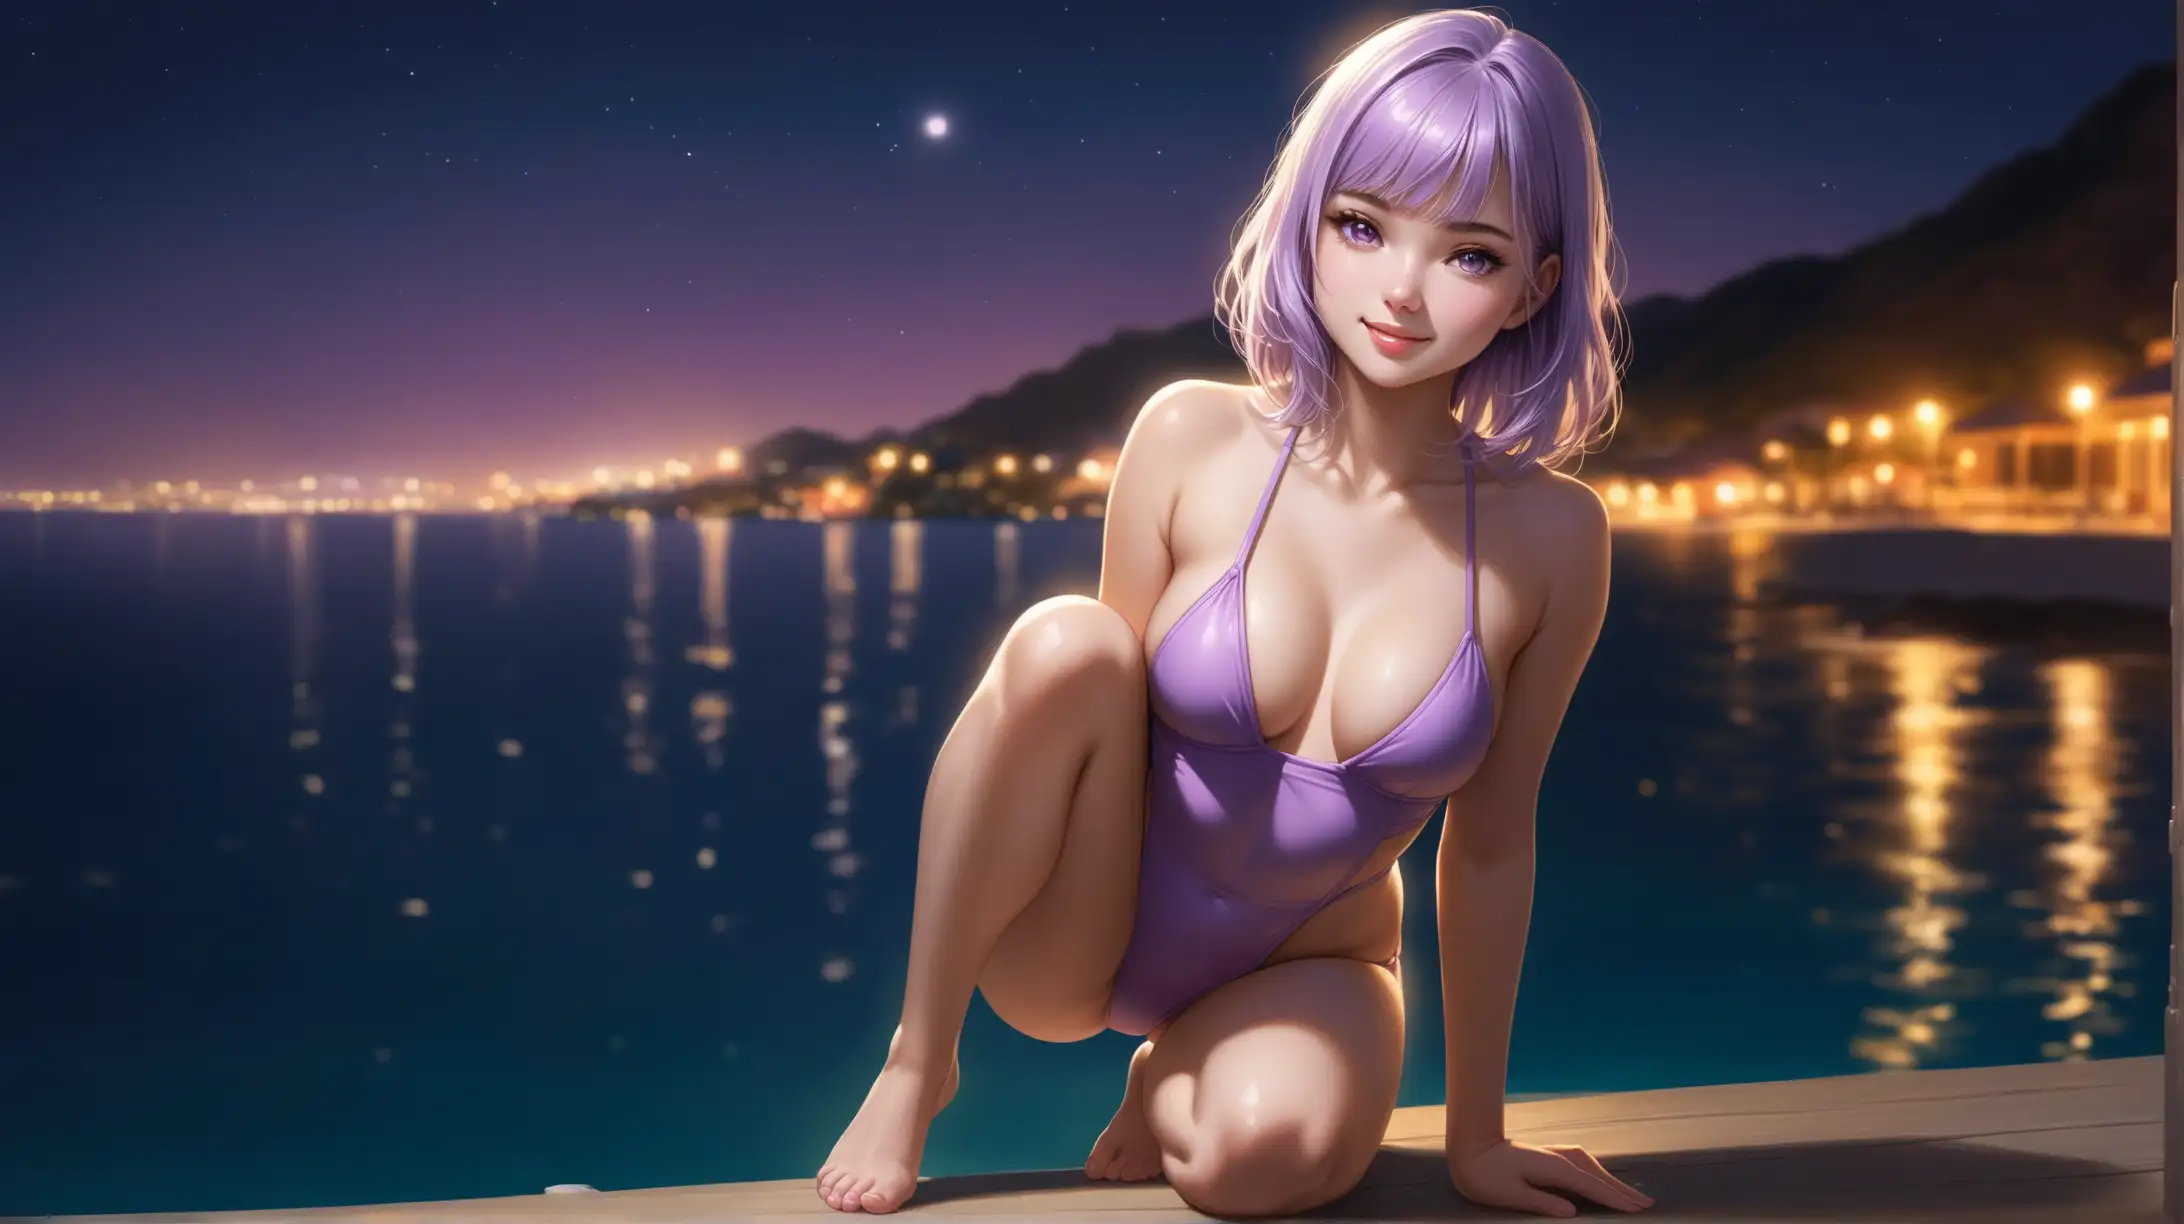 Draw a woman, shoulder length light purple hair, messy bangs framing her face, light purple eyes, petite figure, high quality, realistic, accurate, detailed, long shot, full body, outdoors, night lighting, seductive pose, swimsuit, smiling at the viewer